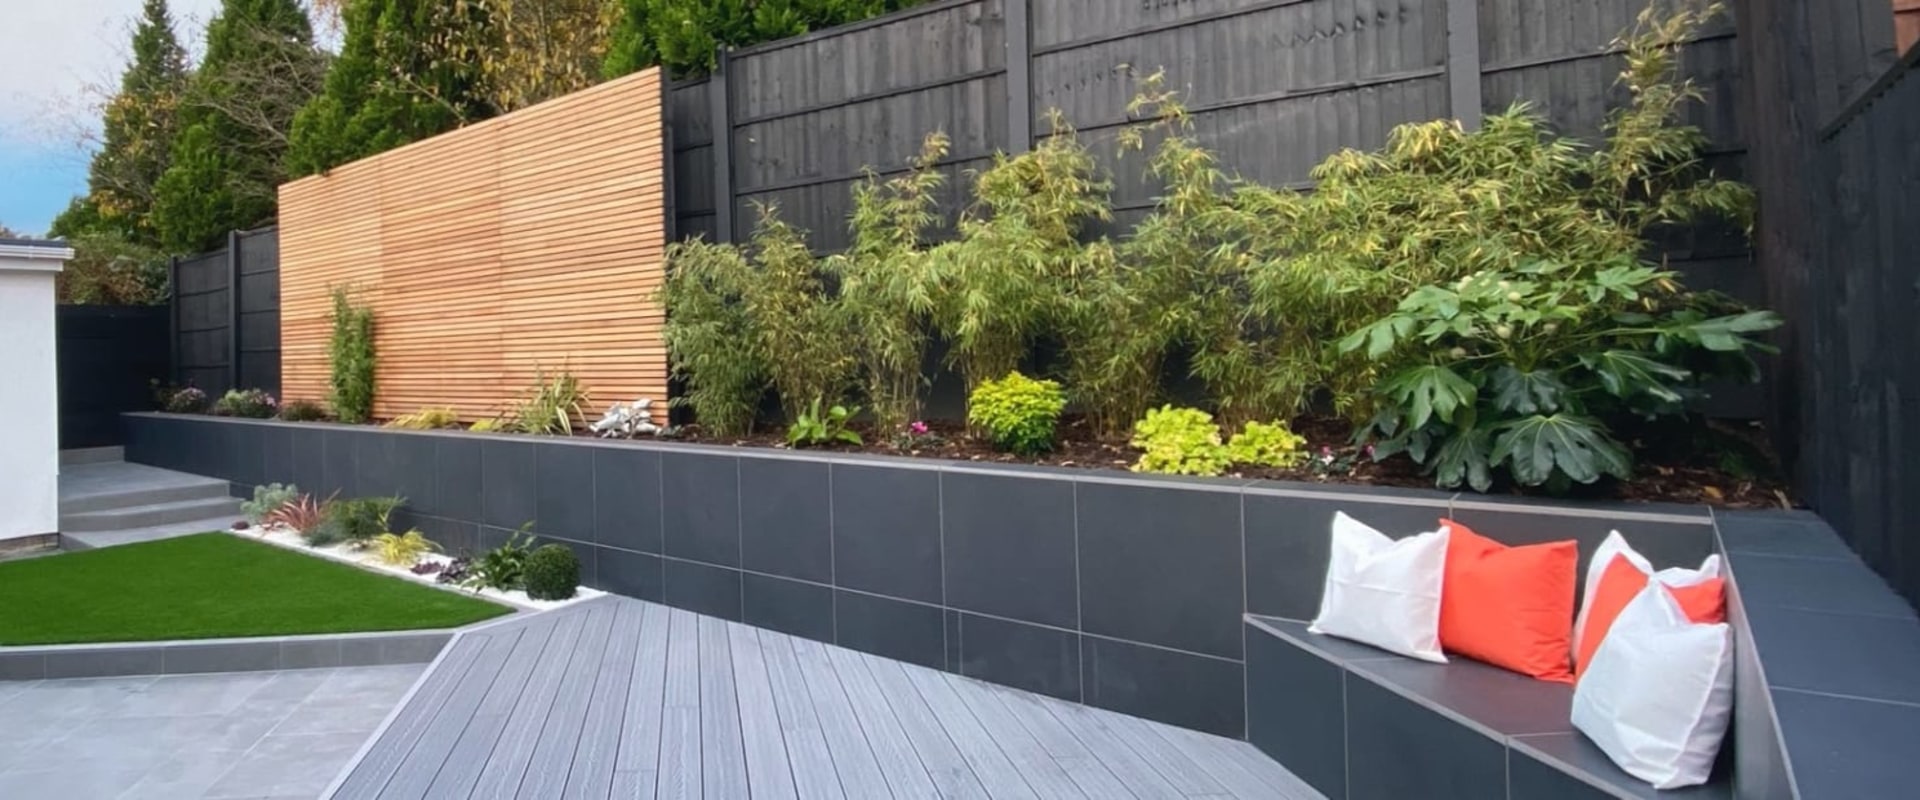 Designing a Garden or Flower Bed: Transforming Your Outdoor Space